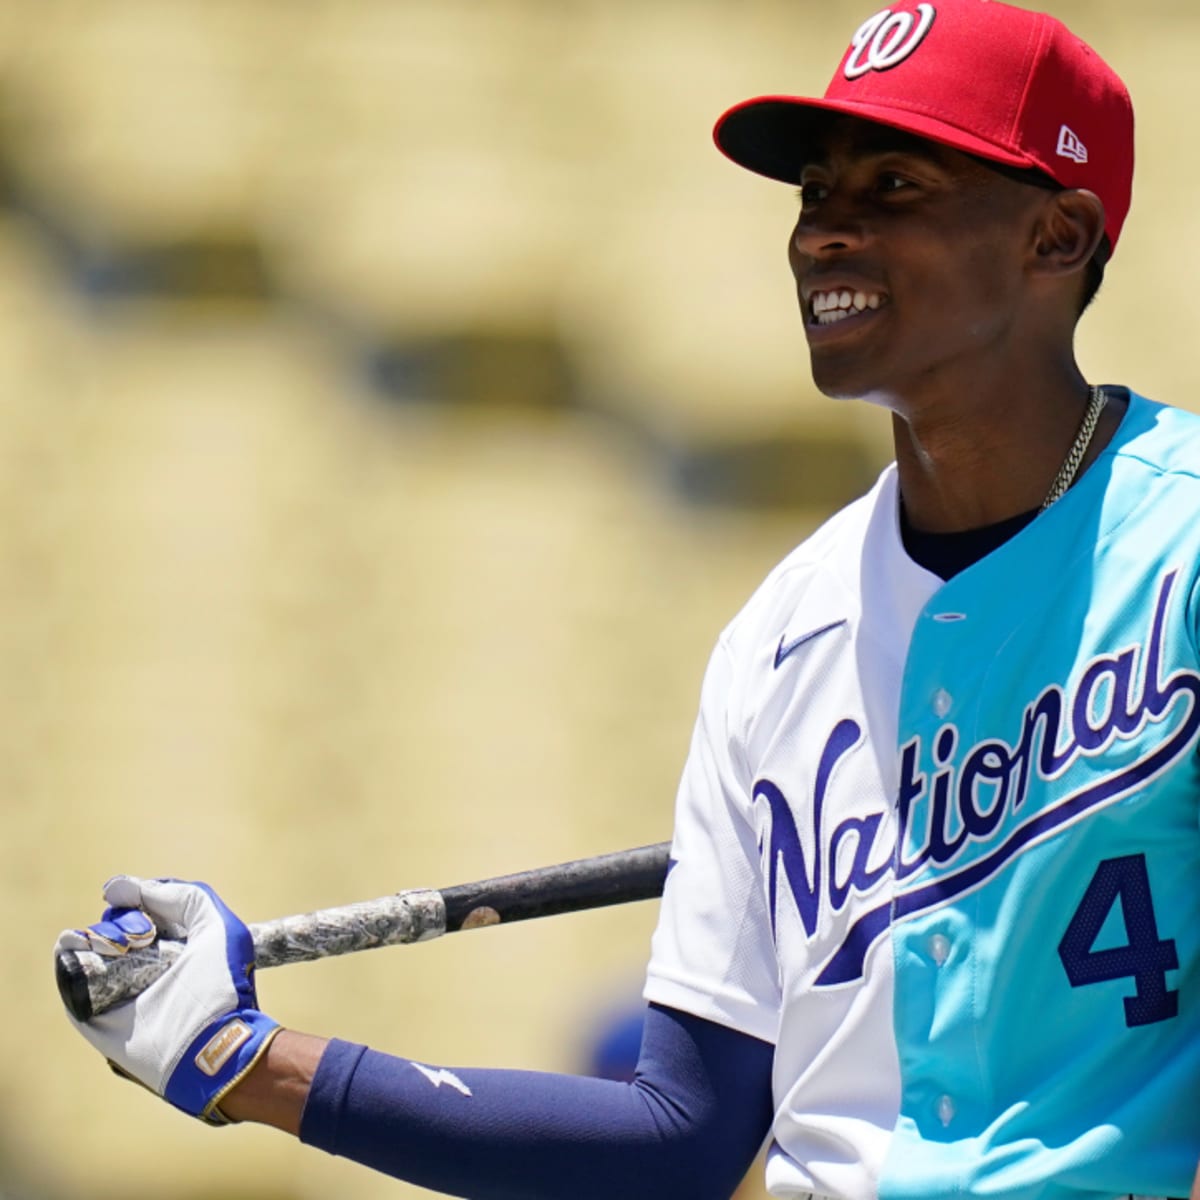 Sons of Dusty Baker, Al Leiter Headline 2022 All-Star Futures Game